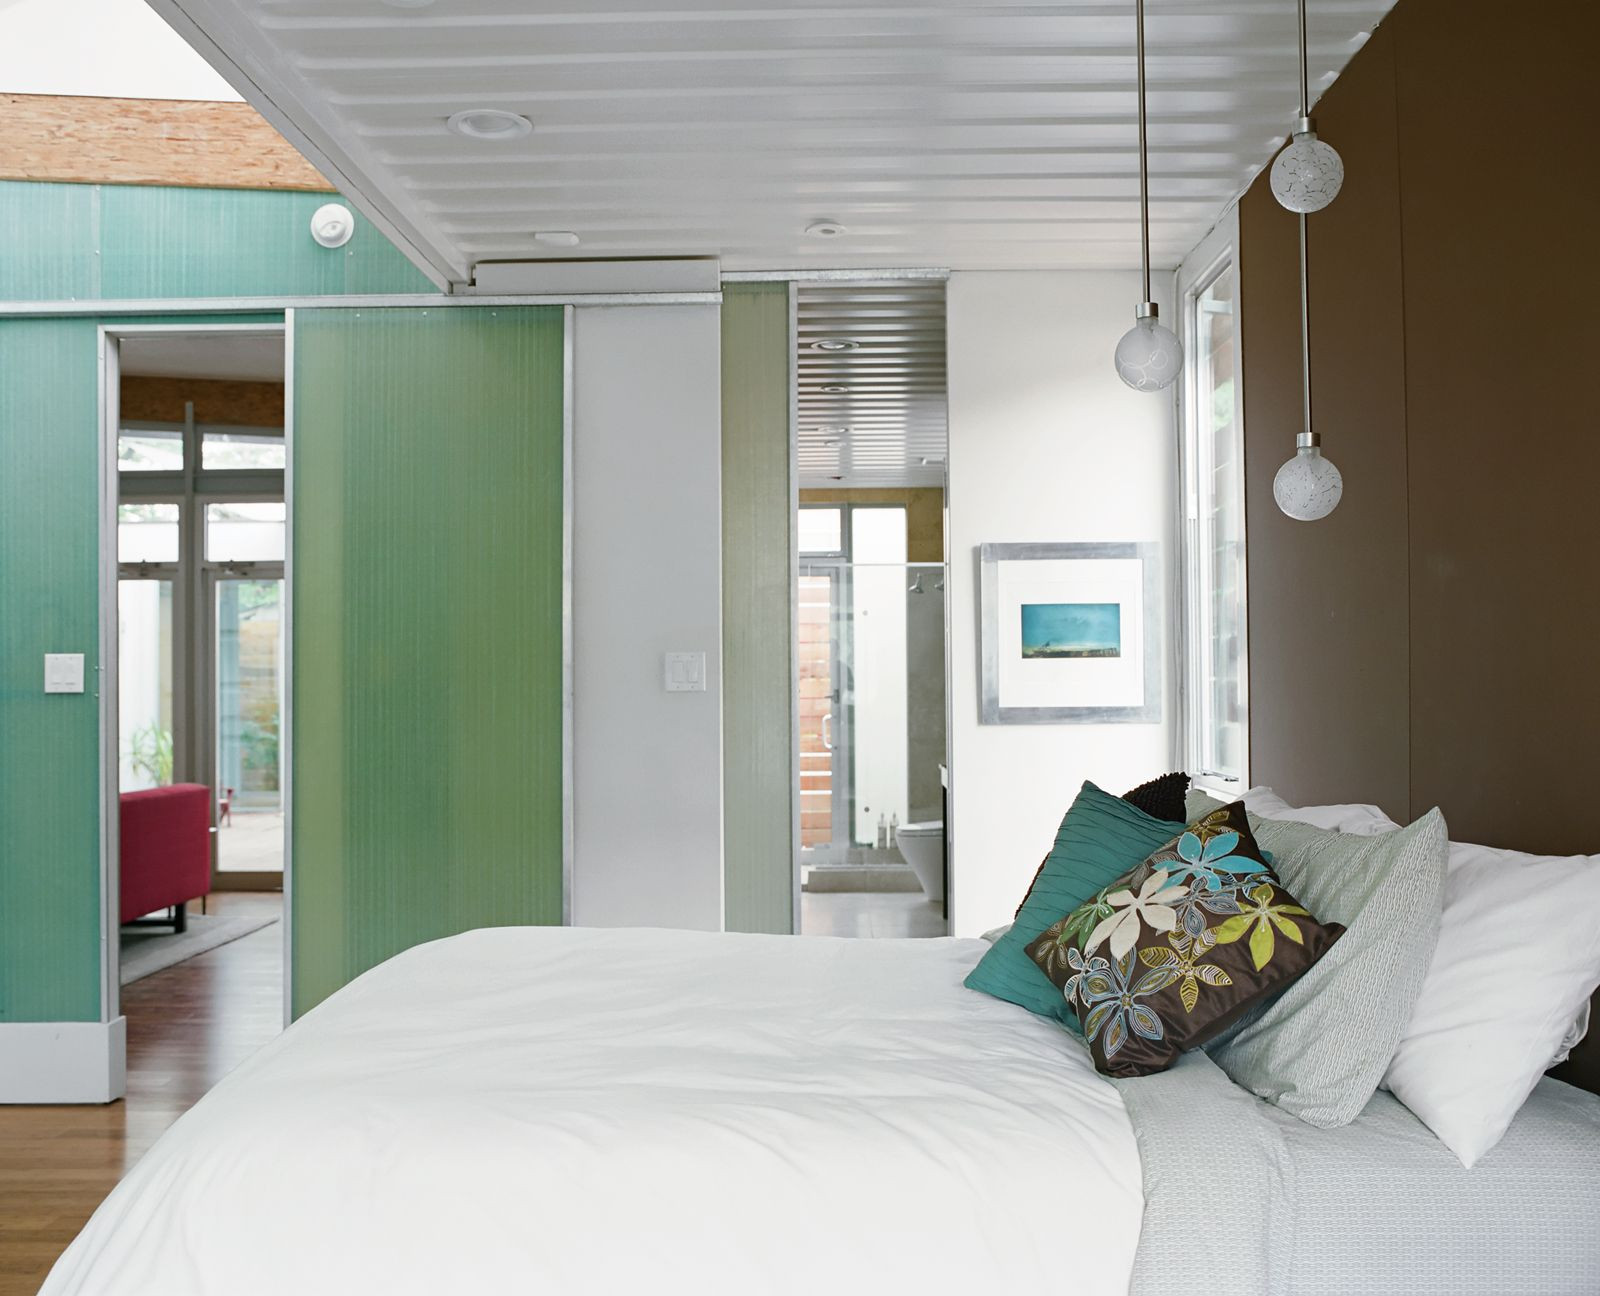 Bedroom Storage Containers
 Family Home In A Shipping Container Can You Make It Work